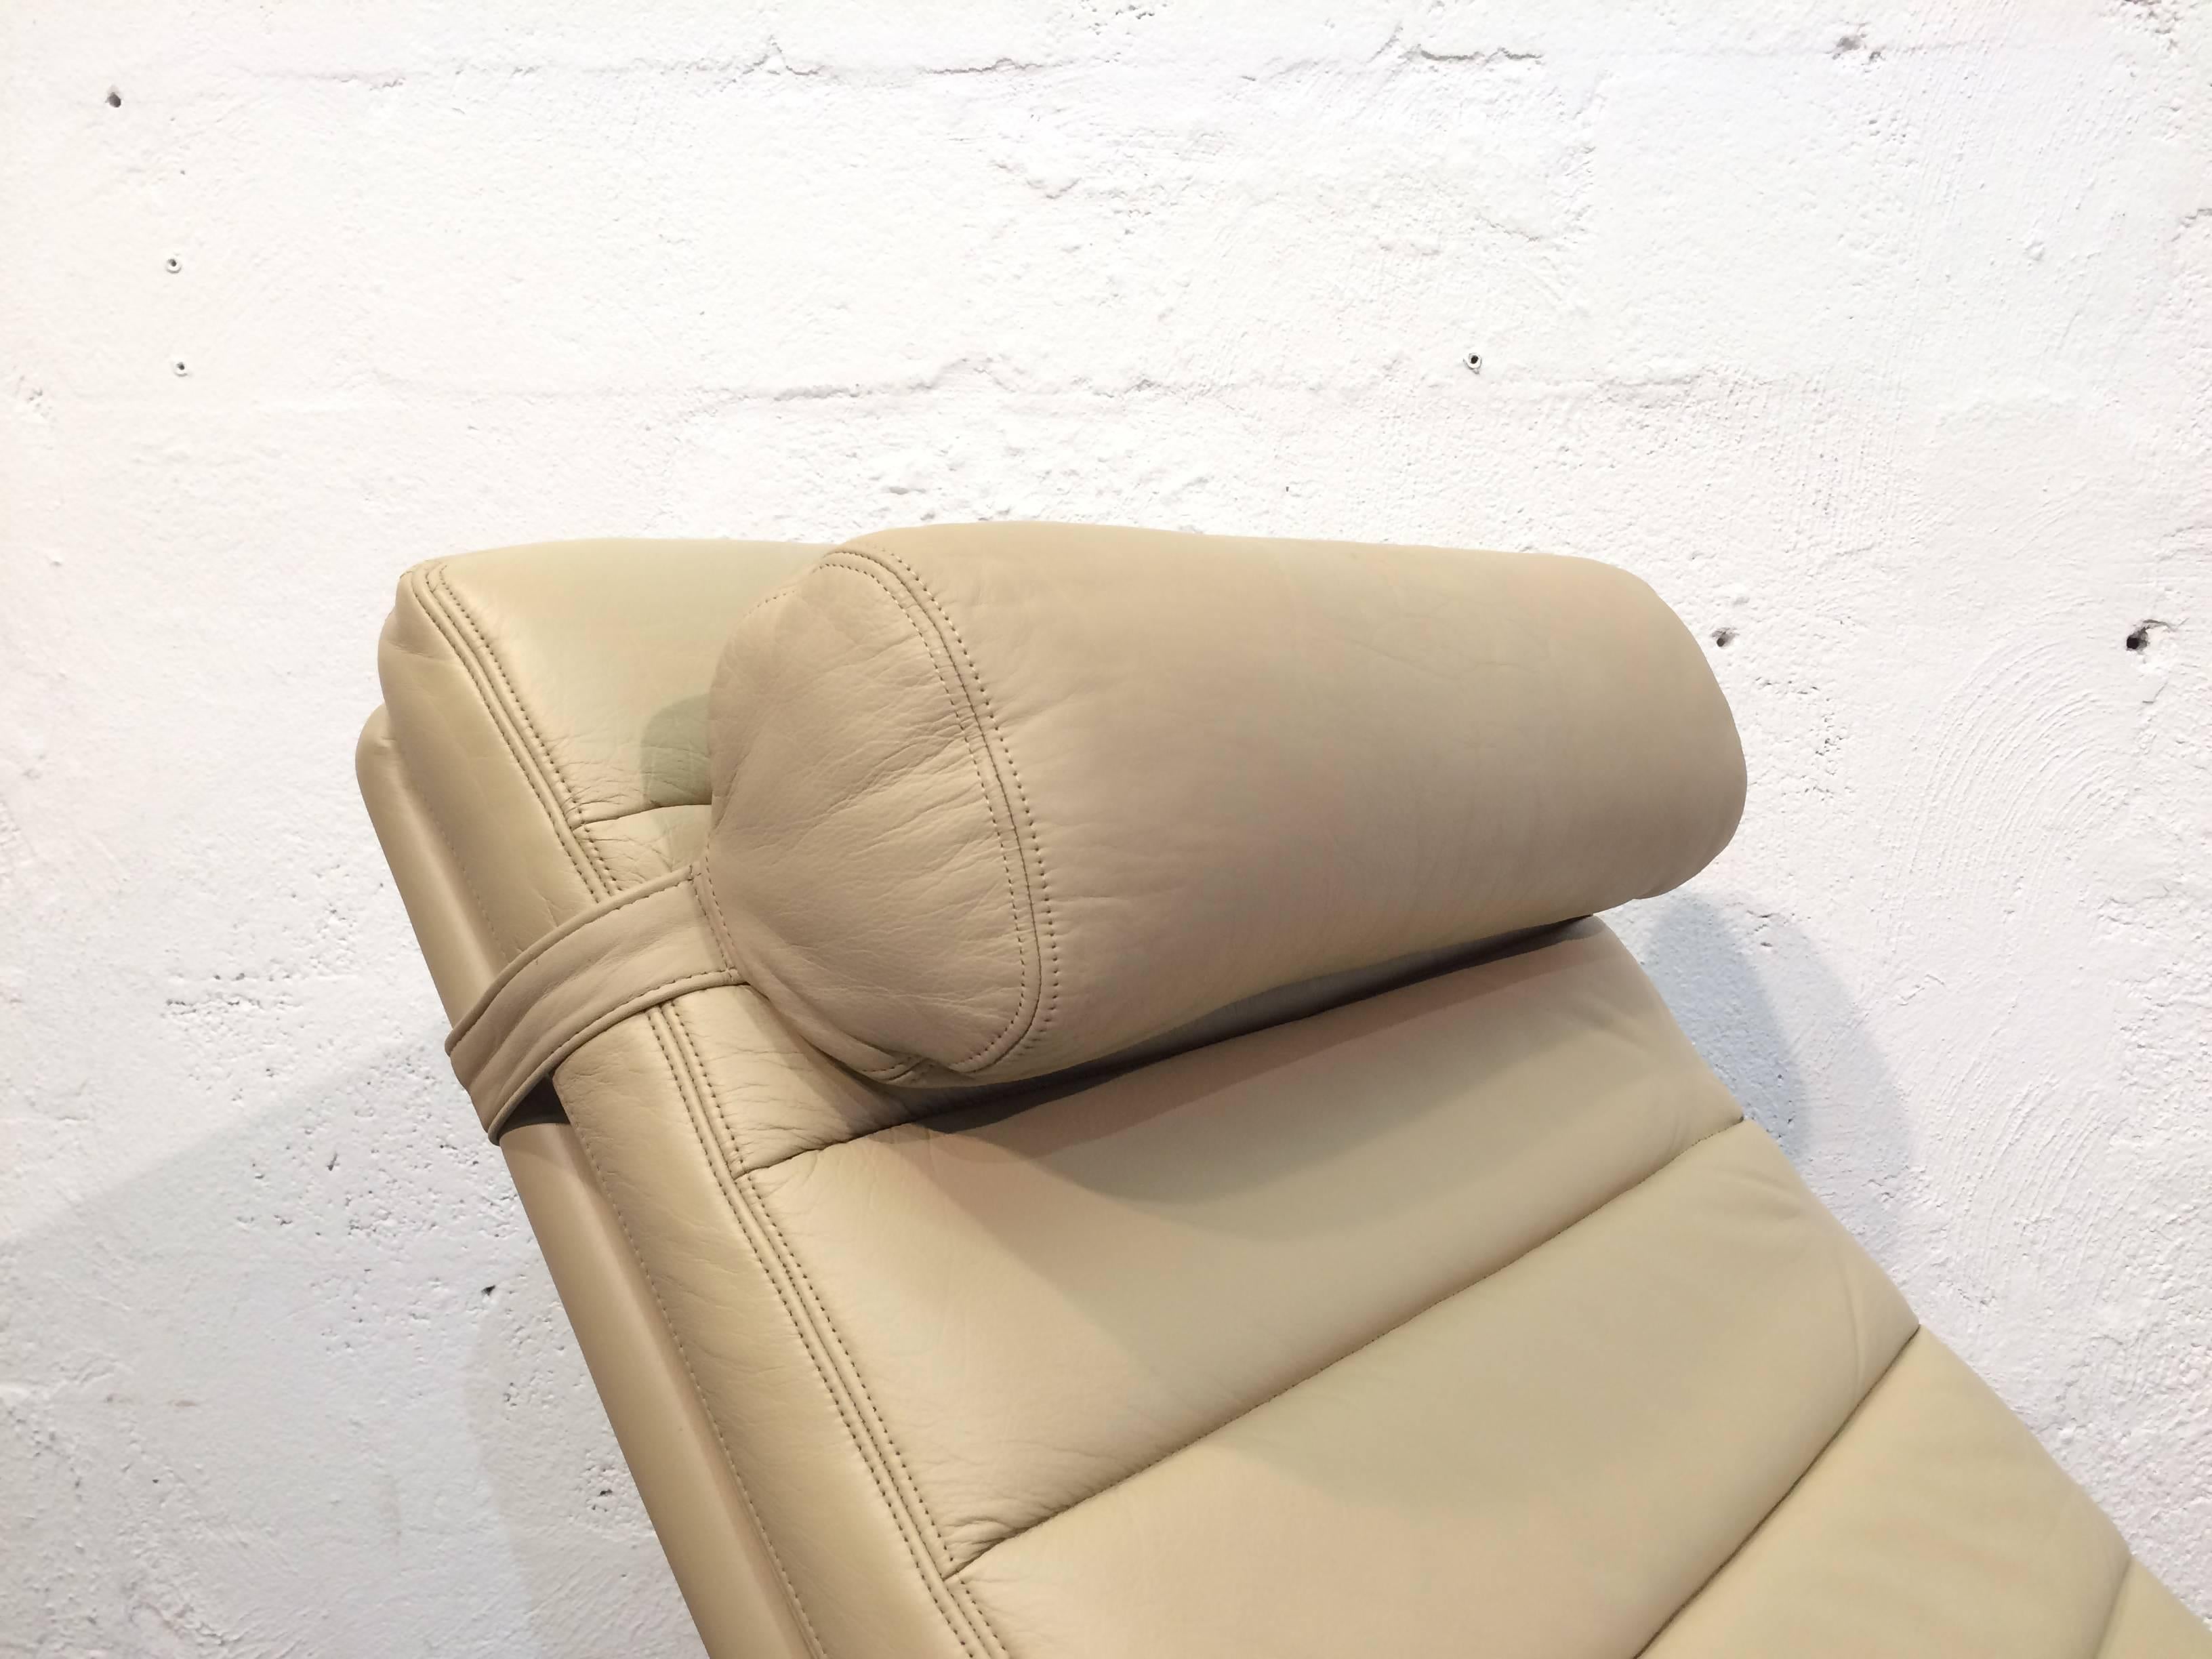 Late 20th Century Leather Chaise Longue by Harvey Probber, USA, 1970s